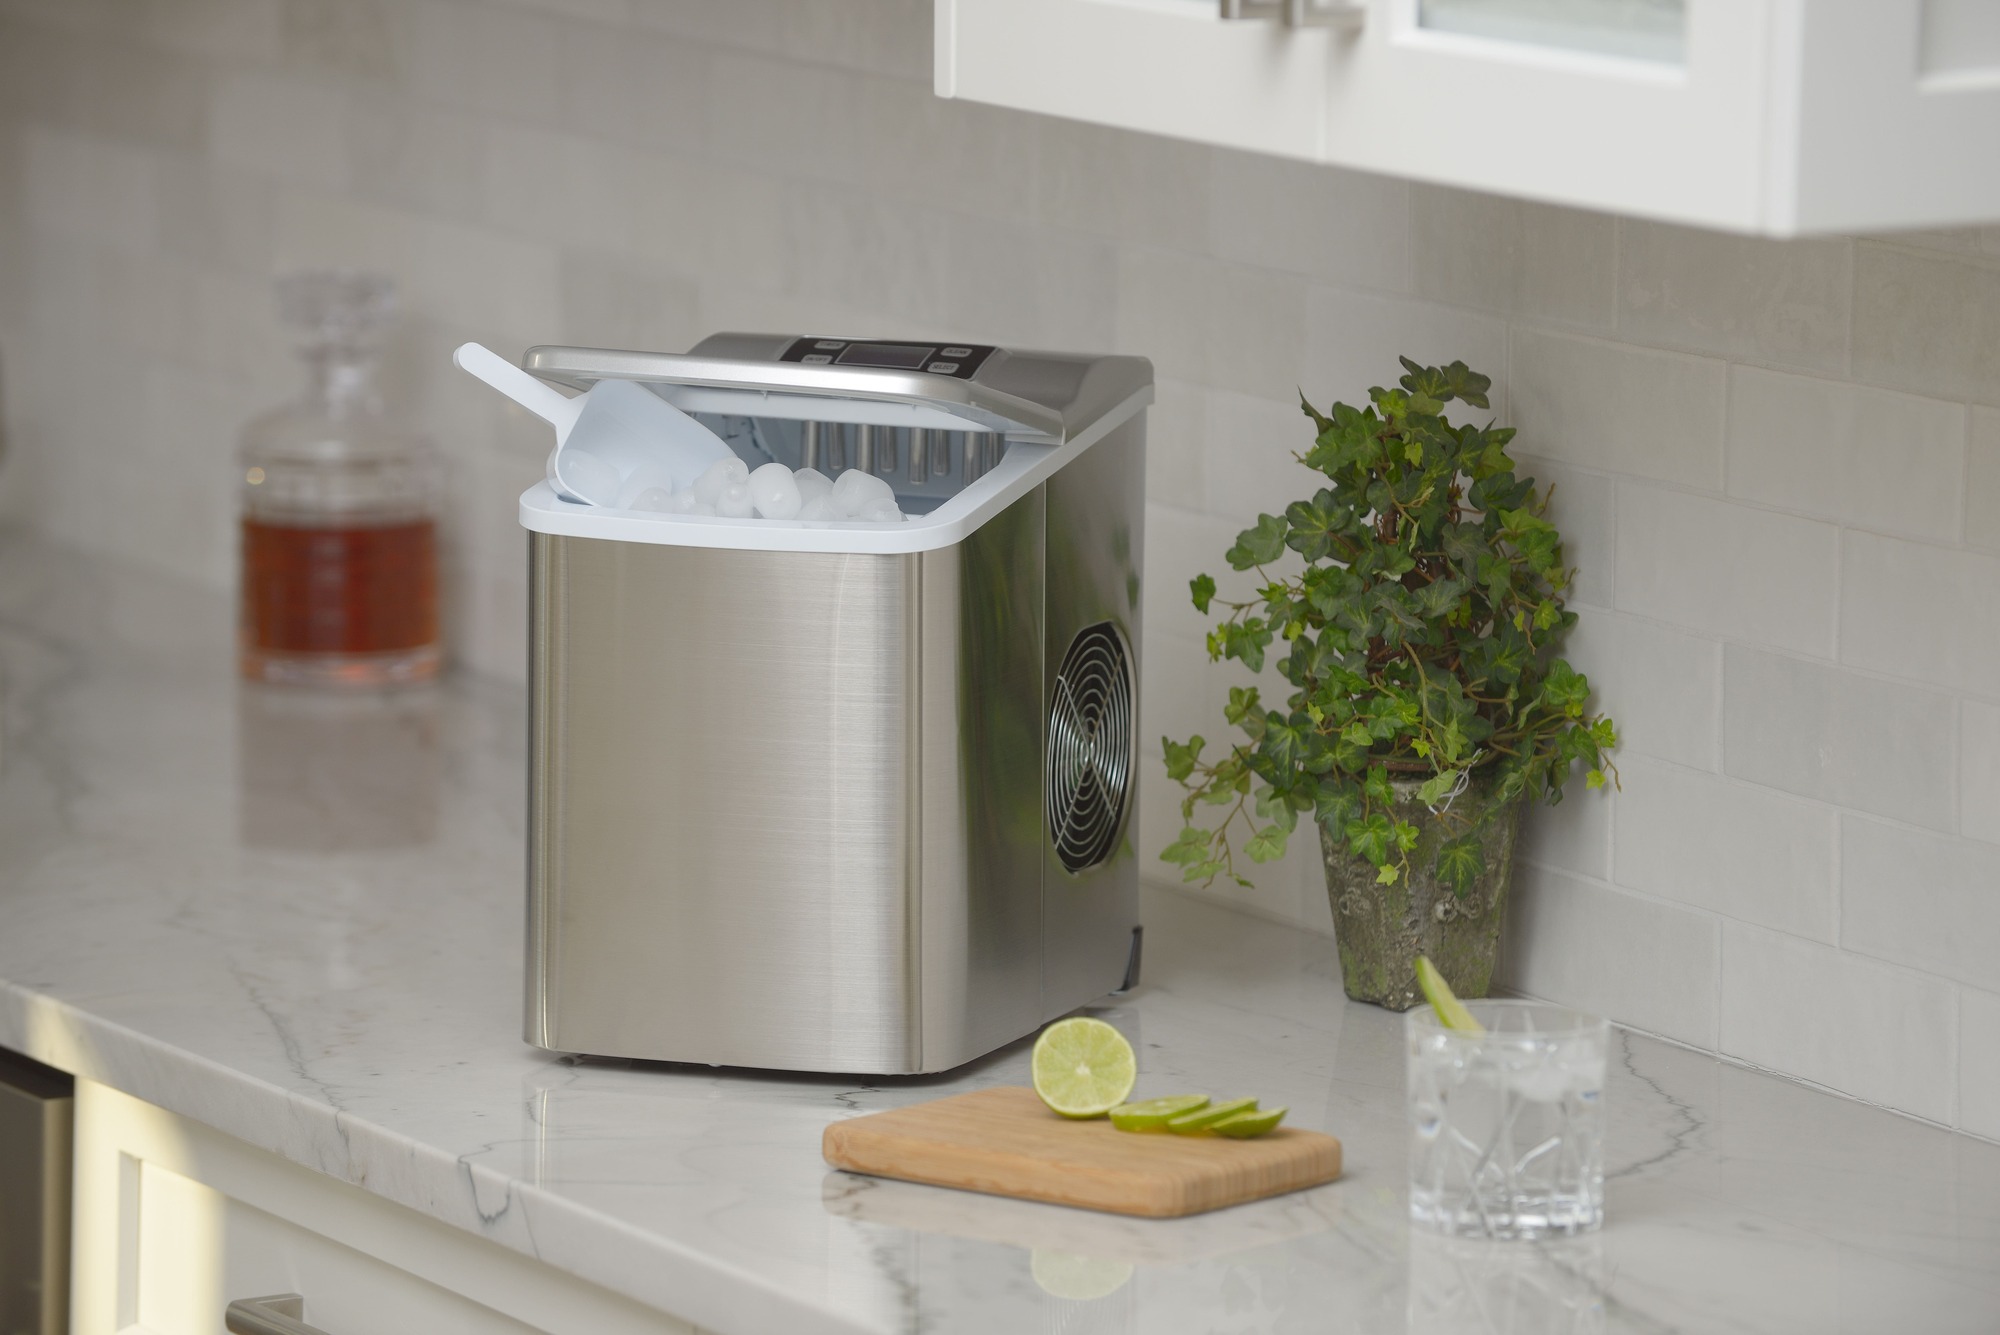 Top Tips to Buy the Best Countertop Nugget Ice Maker for Home 2022